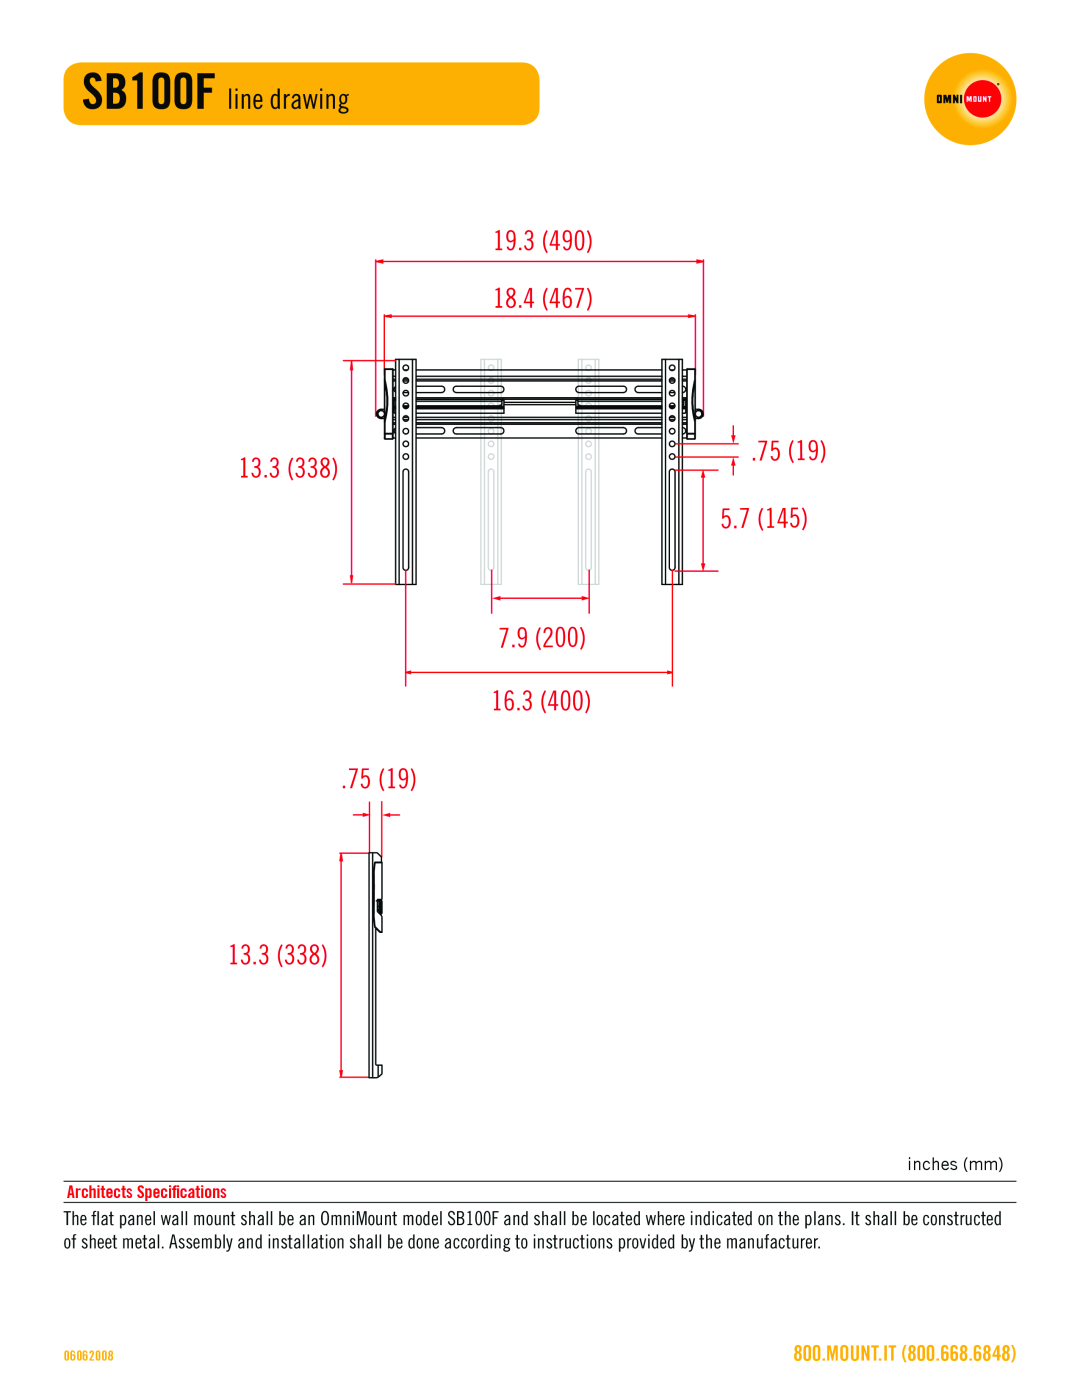 Omnimount manual SB100F line drawing, 13.3, 7.9, 19.3, 18.4, 75 19 5.7, inches mm, Architects Specifications, Mount.It 